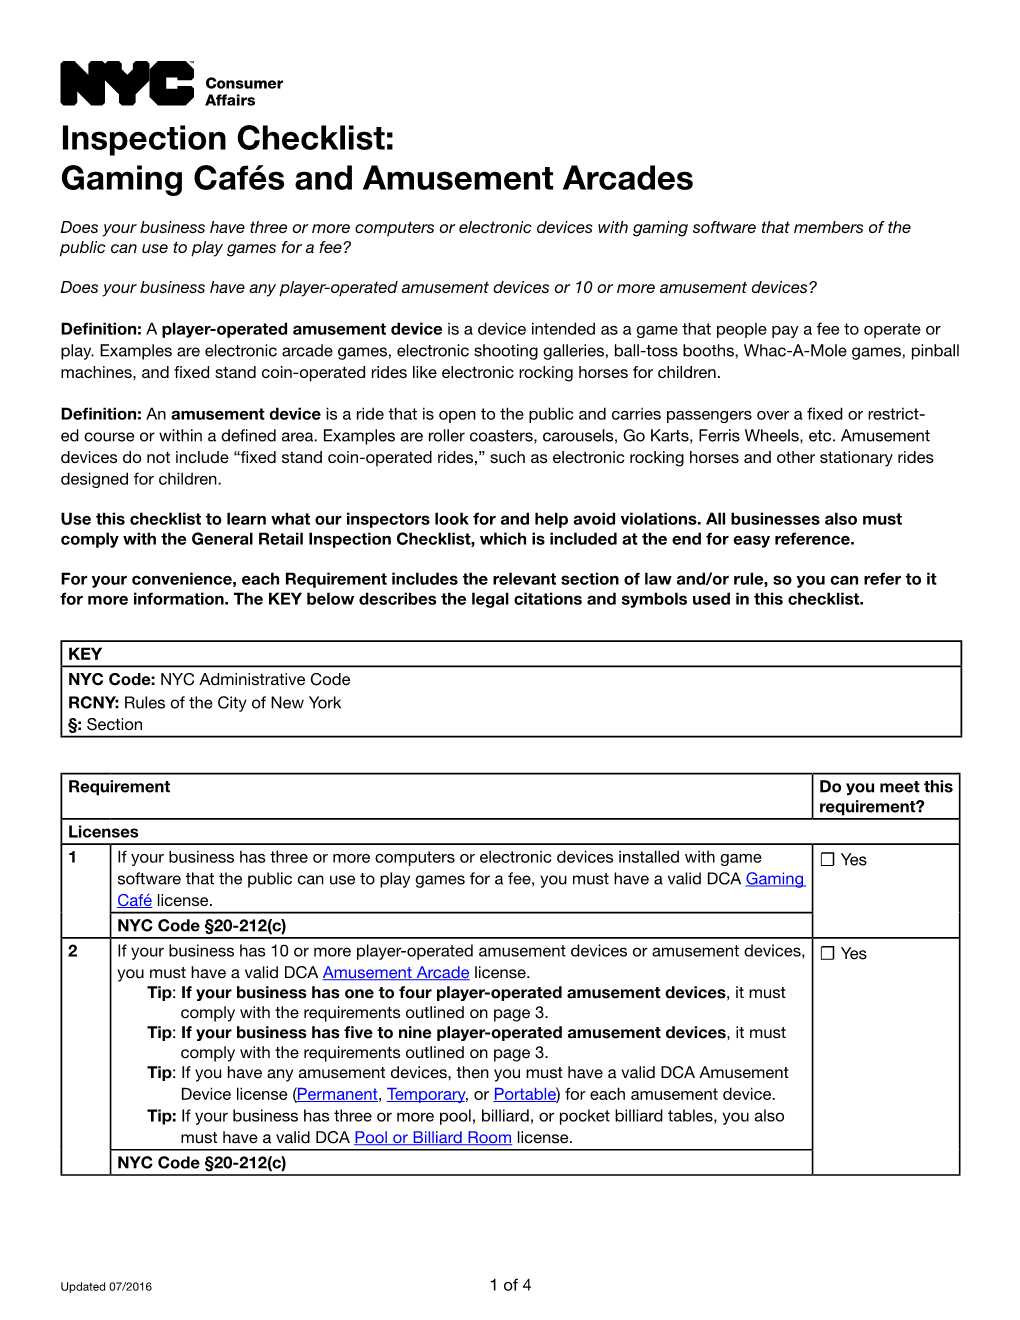 Inspection Checklist: Gaming Cafes and Amusement Arcades